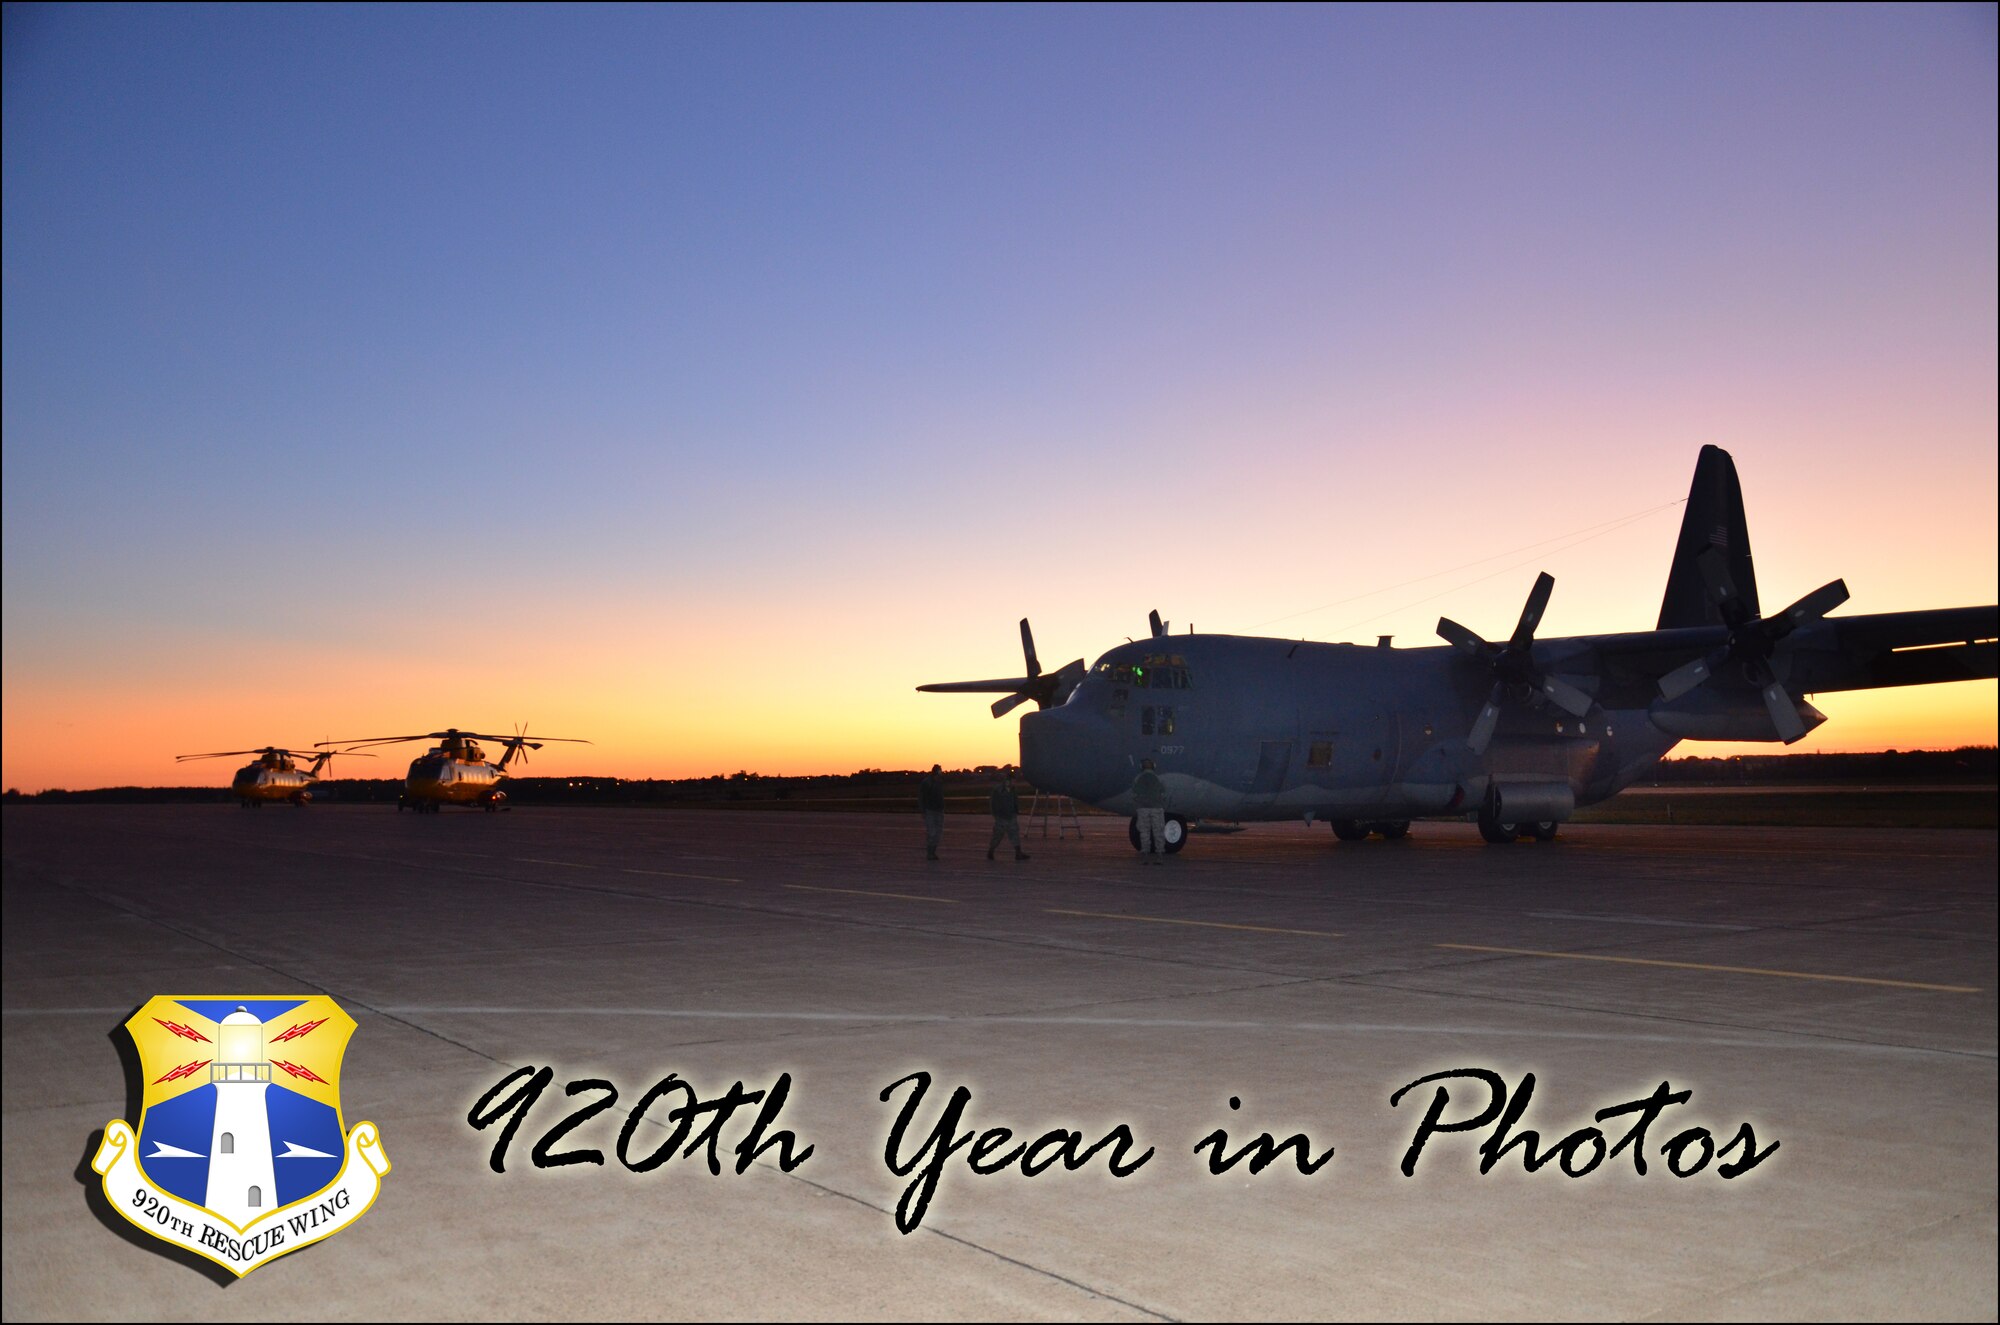 SUMMERSIDE, PRINCE EDWARD ISLAND, Canada- A WC-130J Hercules aircrafts sits on the flight line here as the sun sets. Wing Airmen from the 920th Rescue Wing, Patrick Air Force Base, Fla., piloted the aircraft from Florida to Canada to participate in a search and rescue exercise with Canadian rescue forces in the fall of 2011. (U.S. Air Force photo/Airman 1st Class Natasha Dowridge)